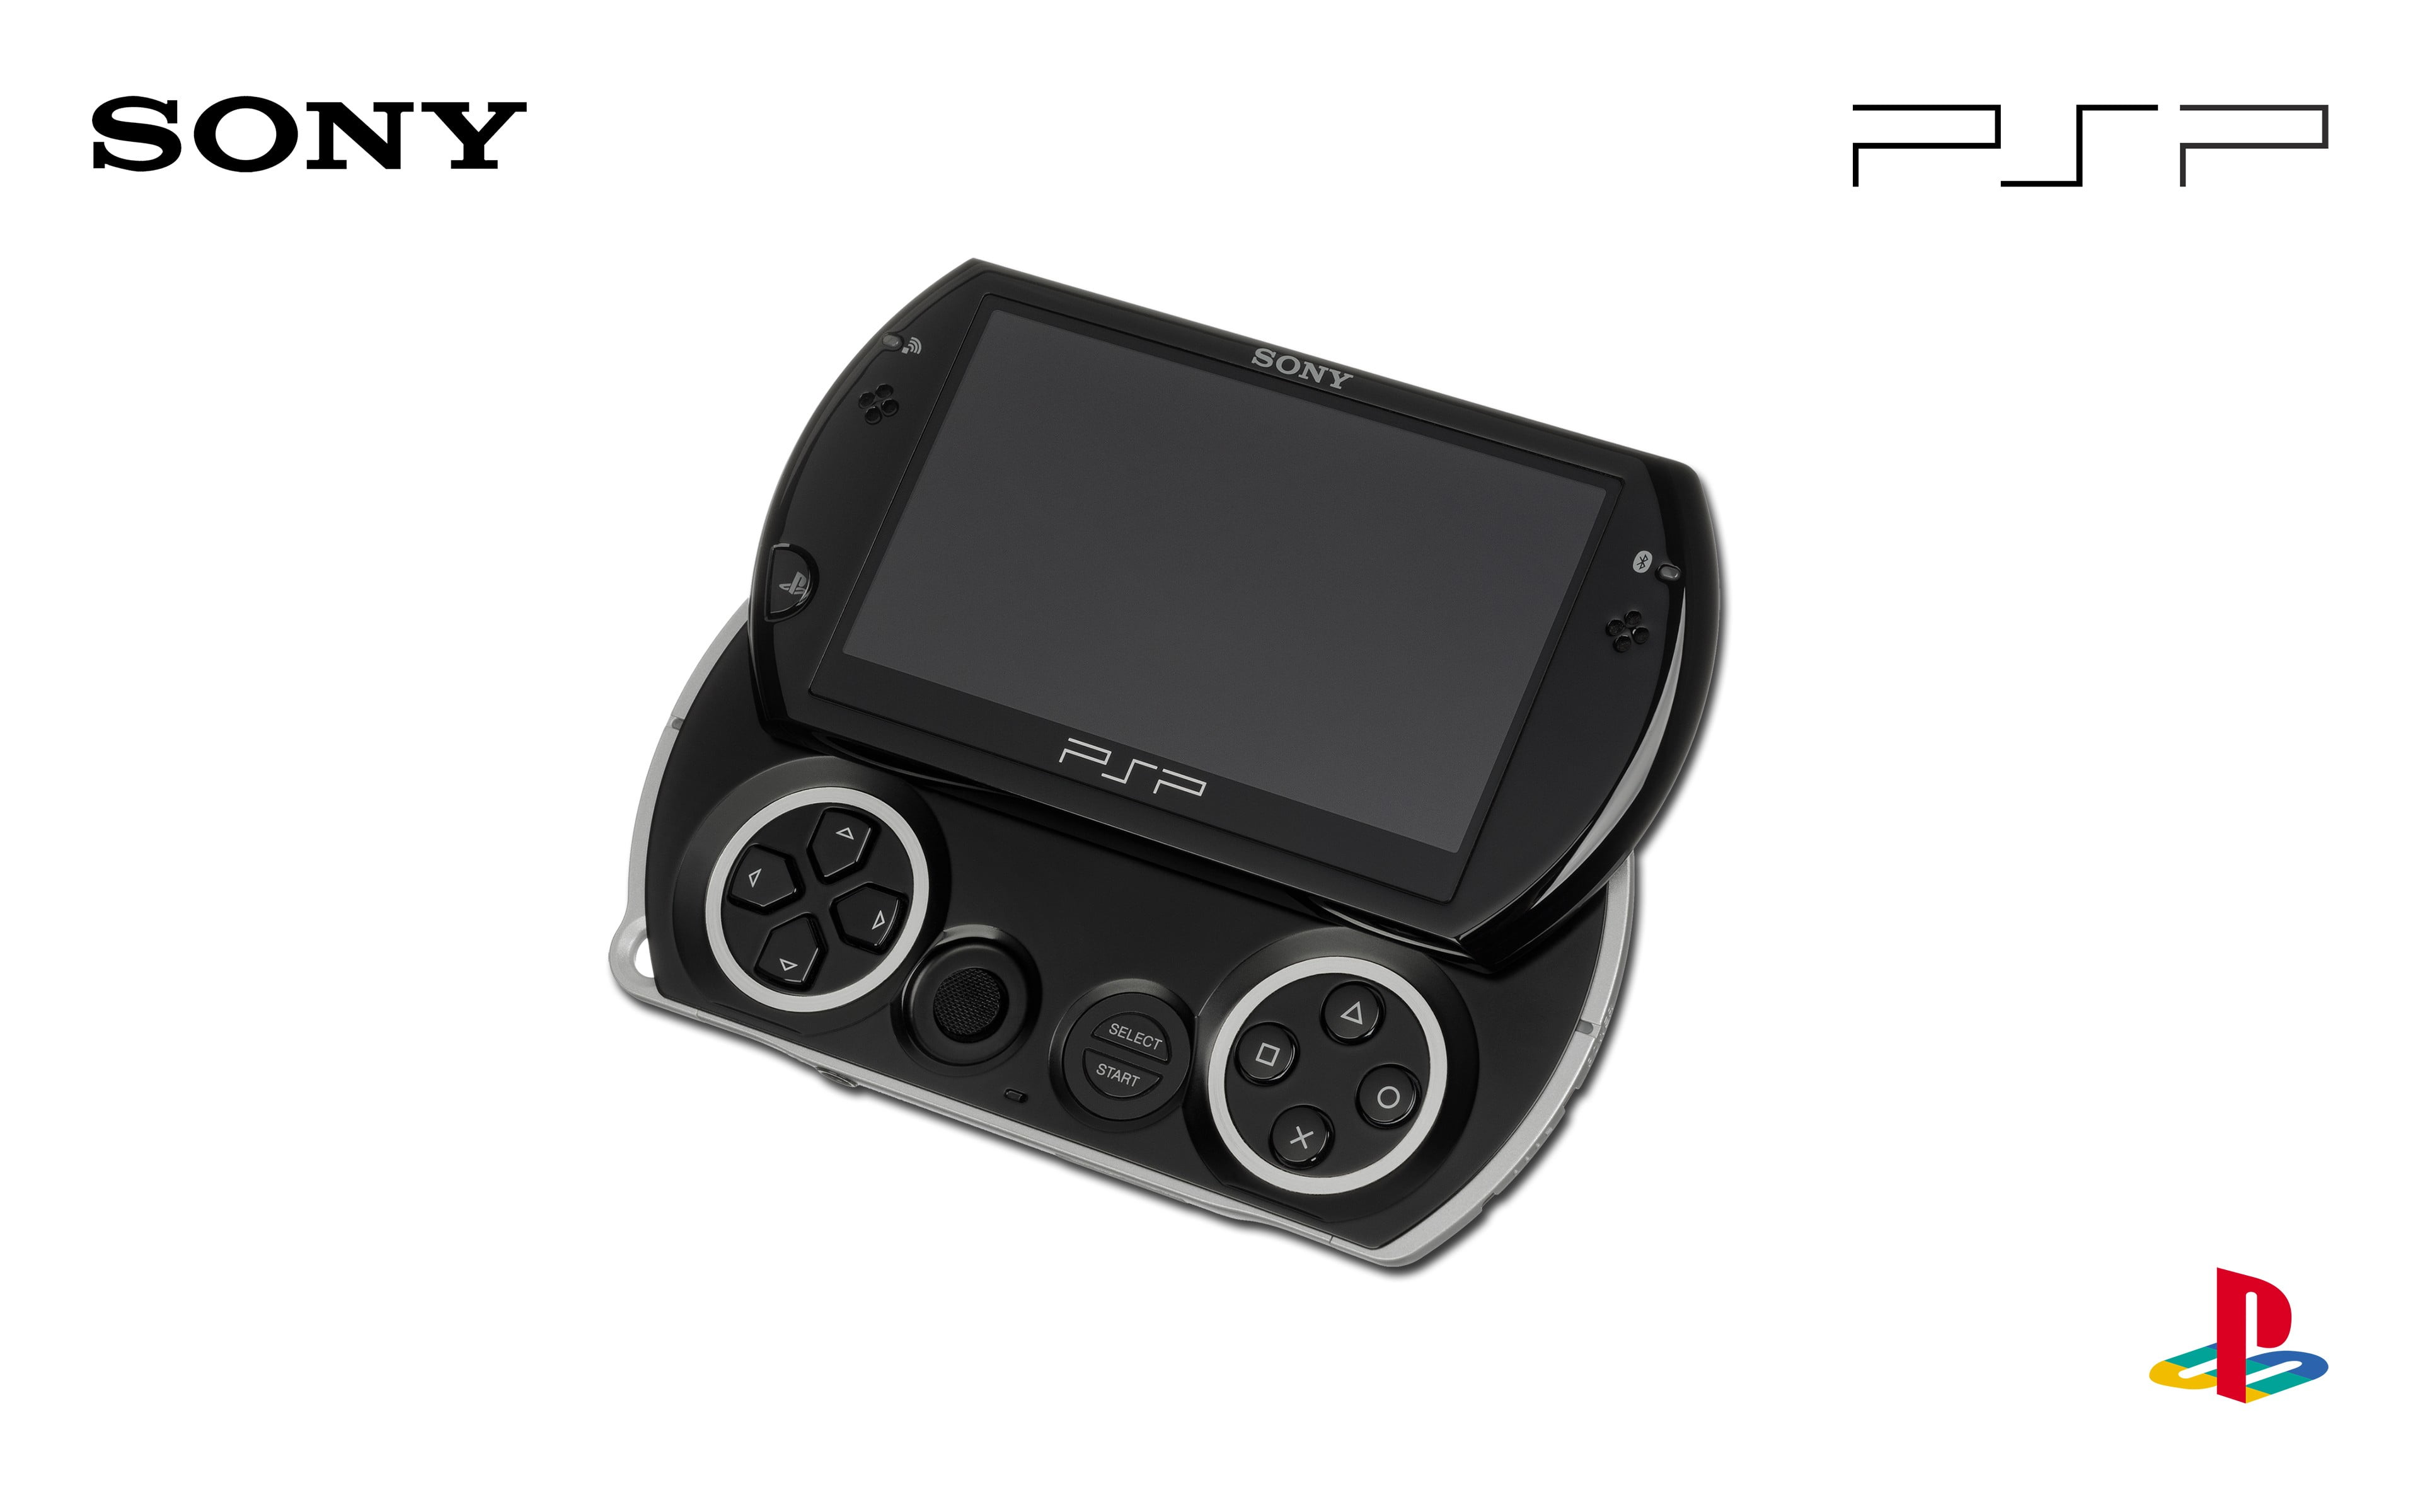 black Sony PSP, consoles, video games, simple background, technology